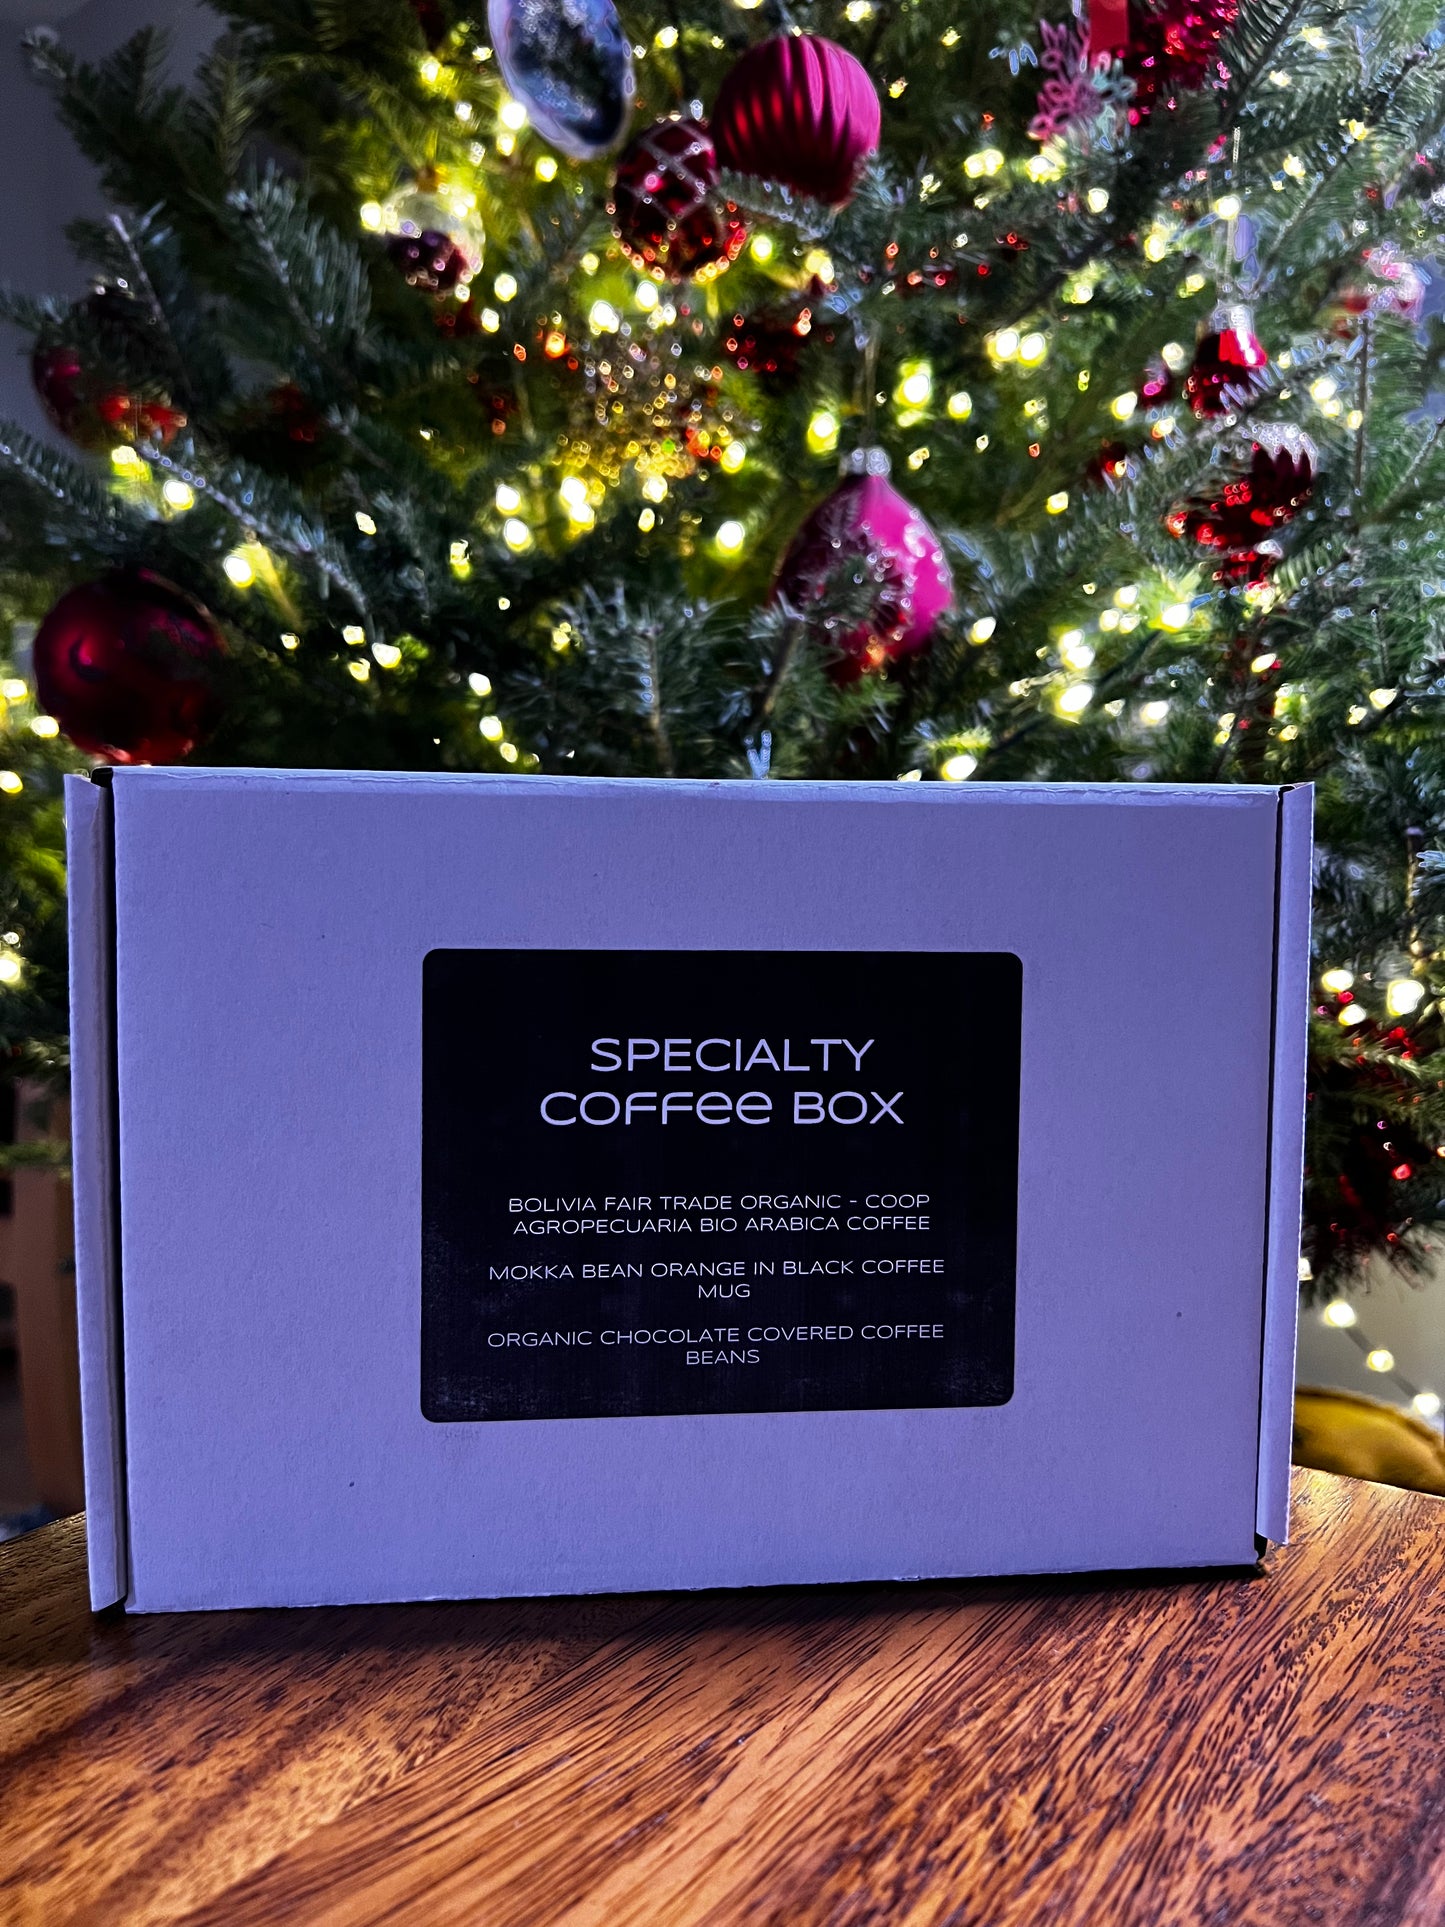 SPECIALTY COFFEE BOX